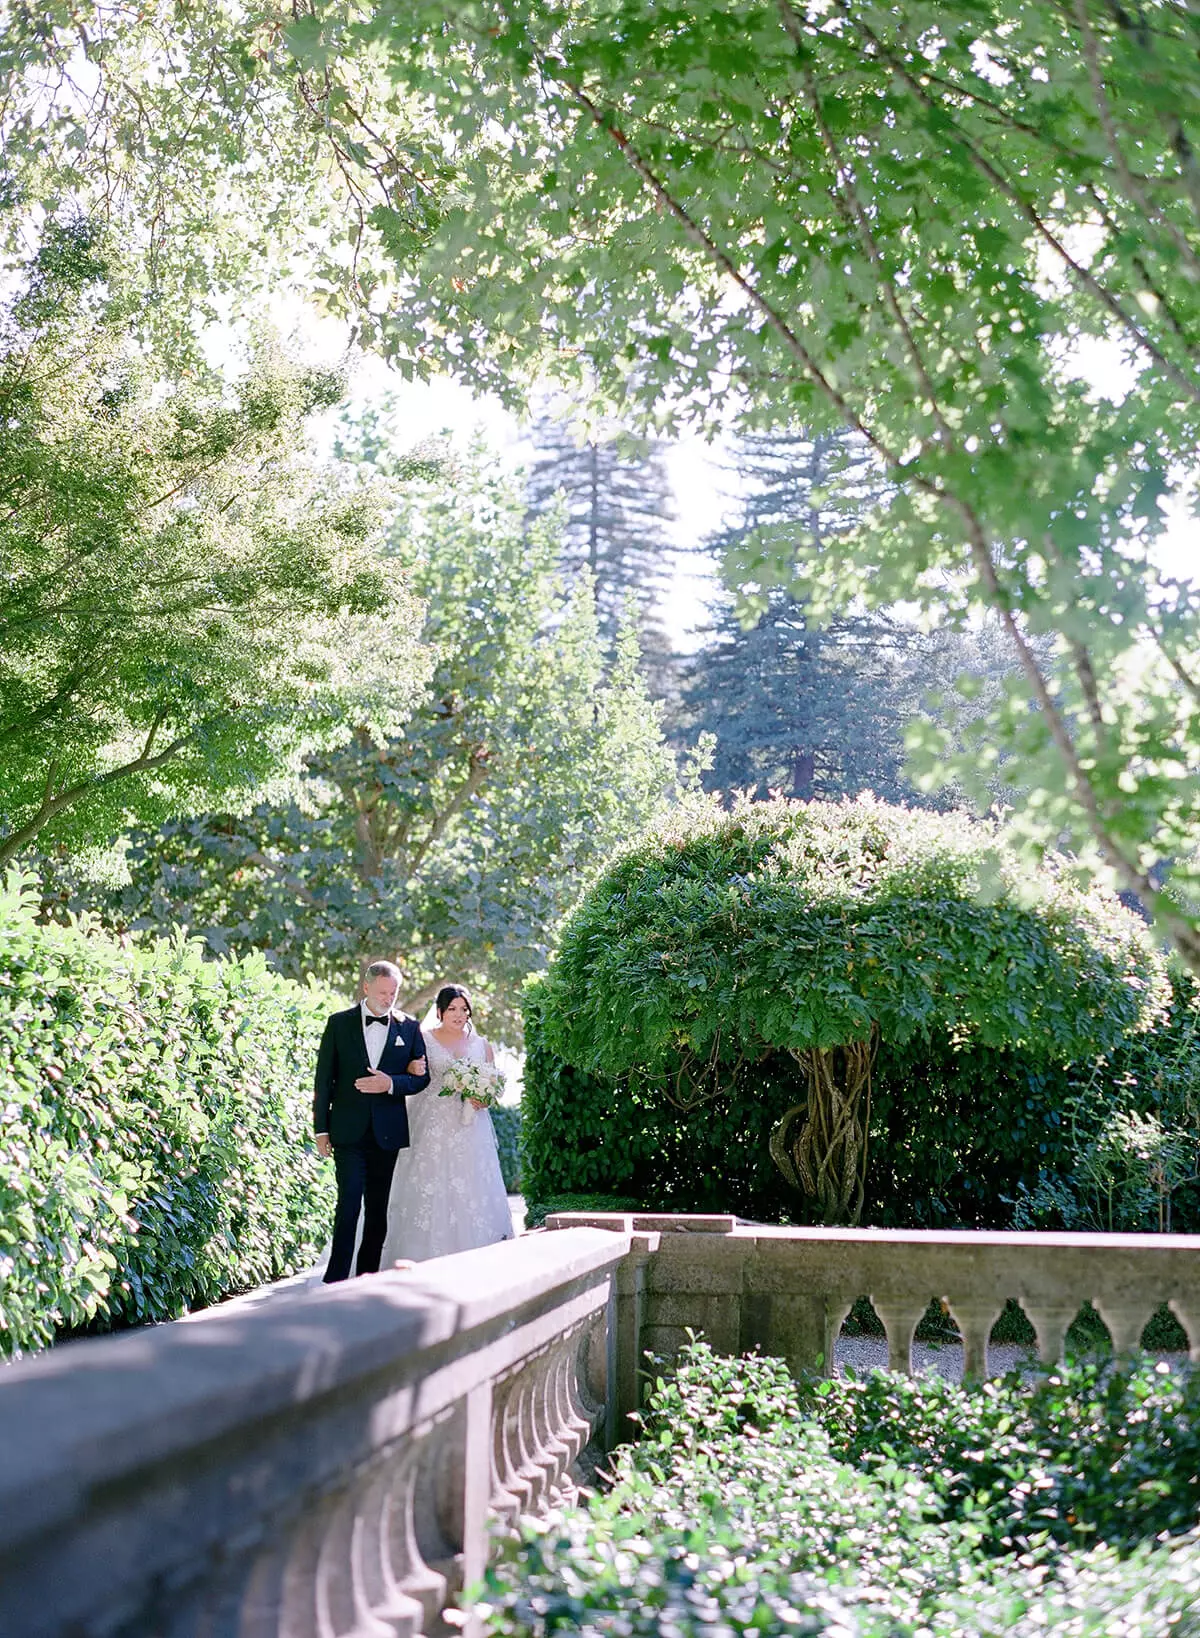 at Beaulieu Garden, wedding venue, Napa Valley, wedding day styling by The Stylish Bride